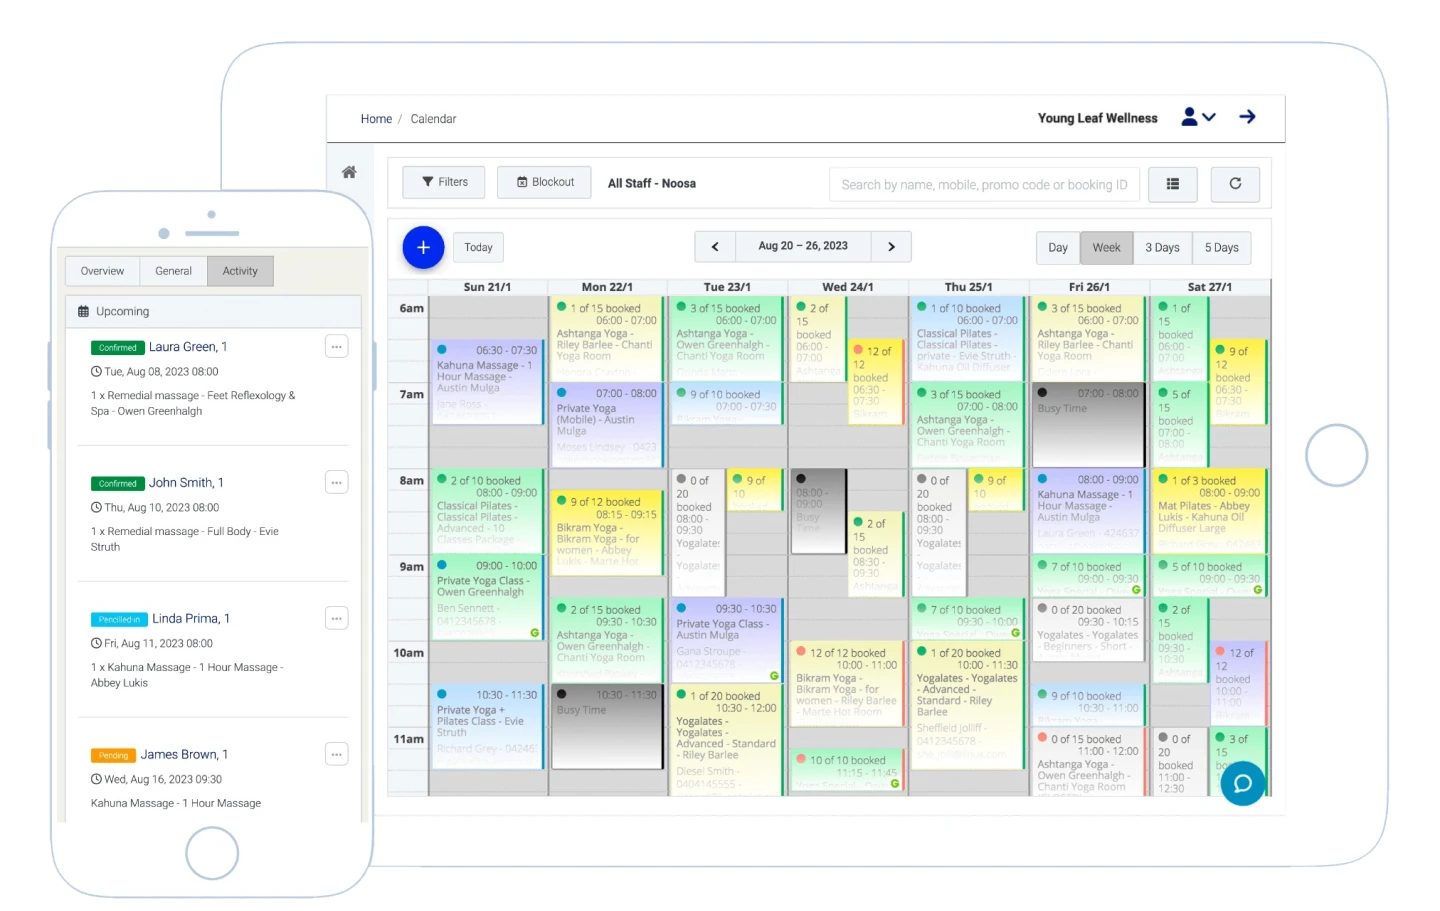 Ndis providers, Nabooki booking system calendar and upcoming bookings screenshots on mobile devices